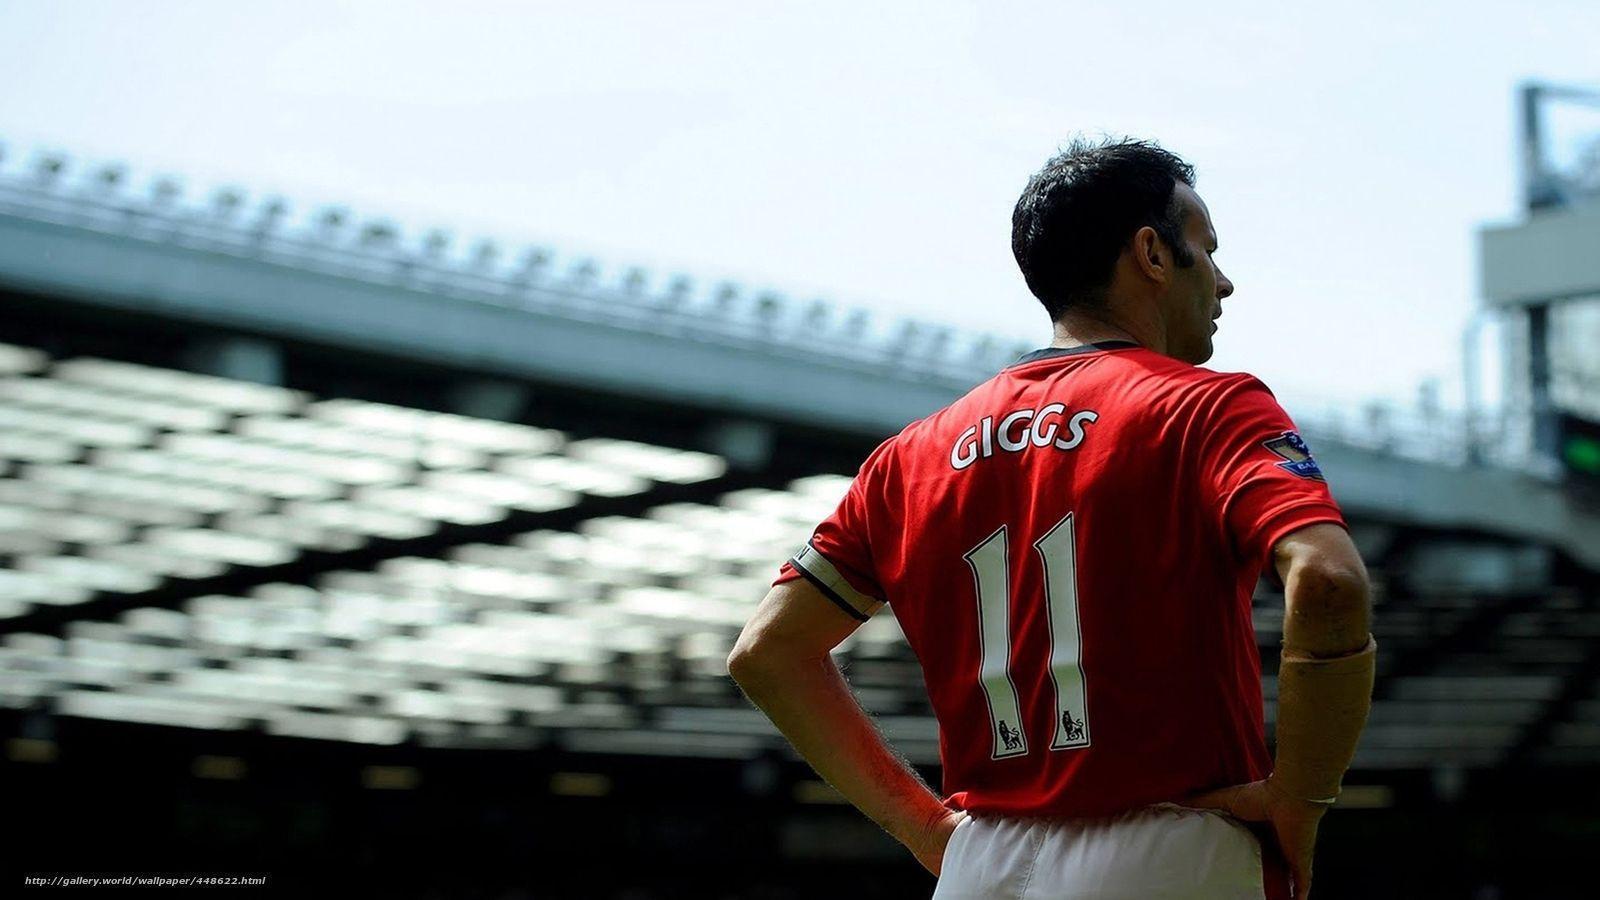 Download wallpaper Ryan Giggs, football, Manchester United